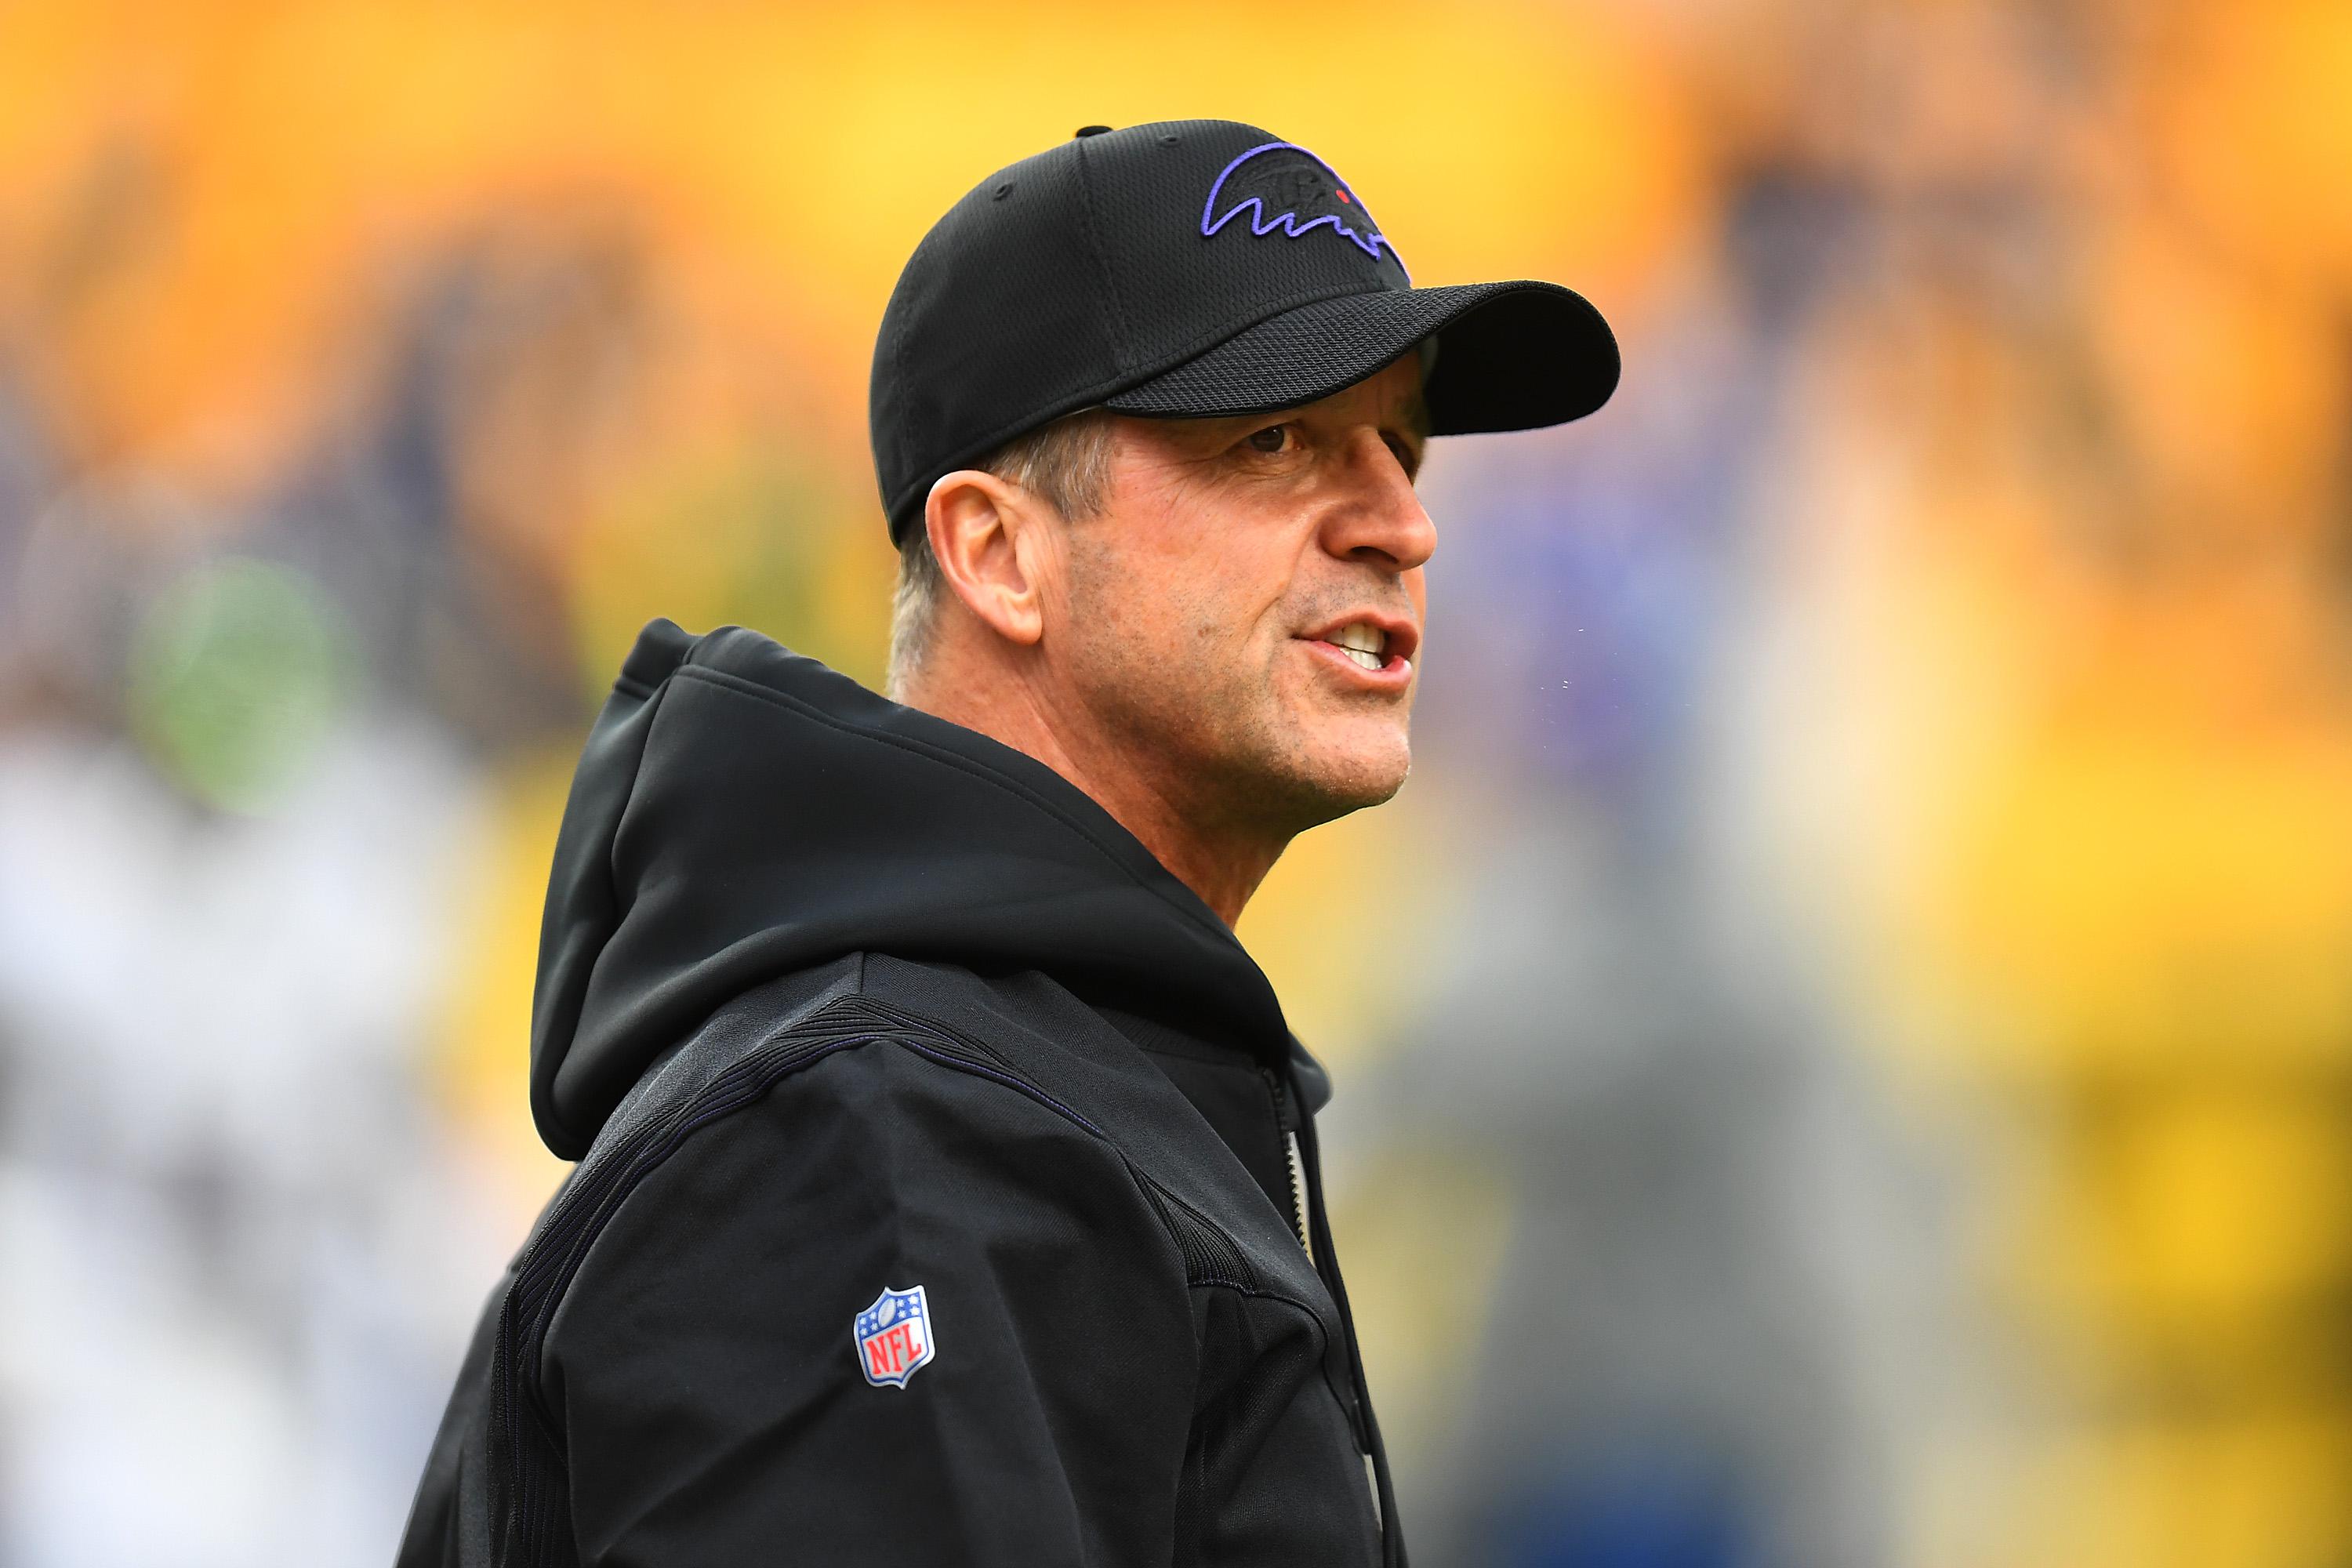 Harbaugh speaking with a hooded jacket and Ravens hat on, on the sideline